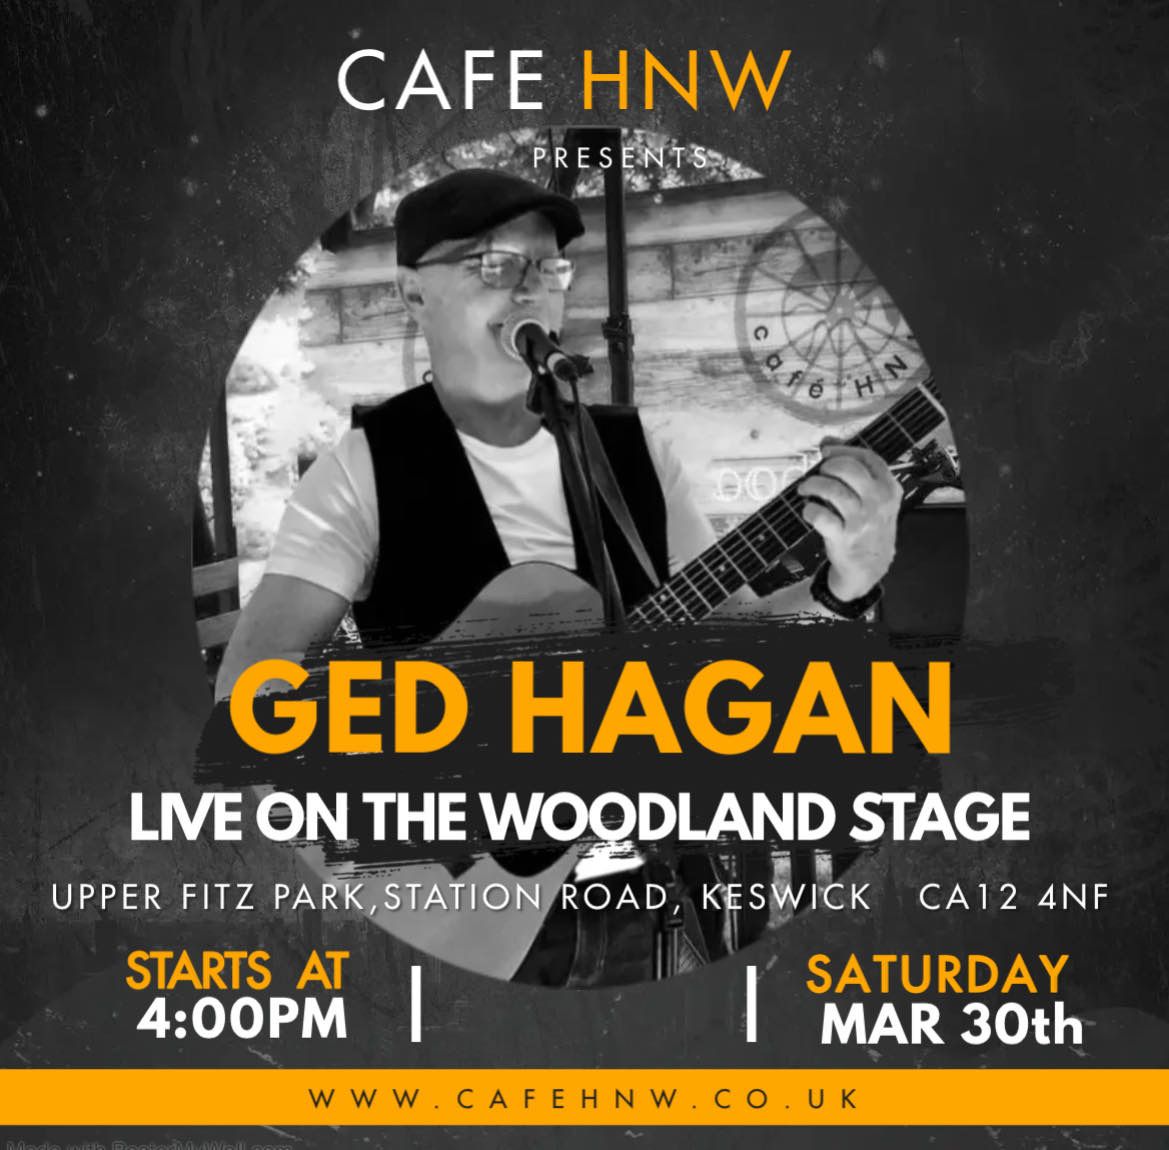 Live Music with Ged Hagan